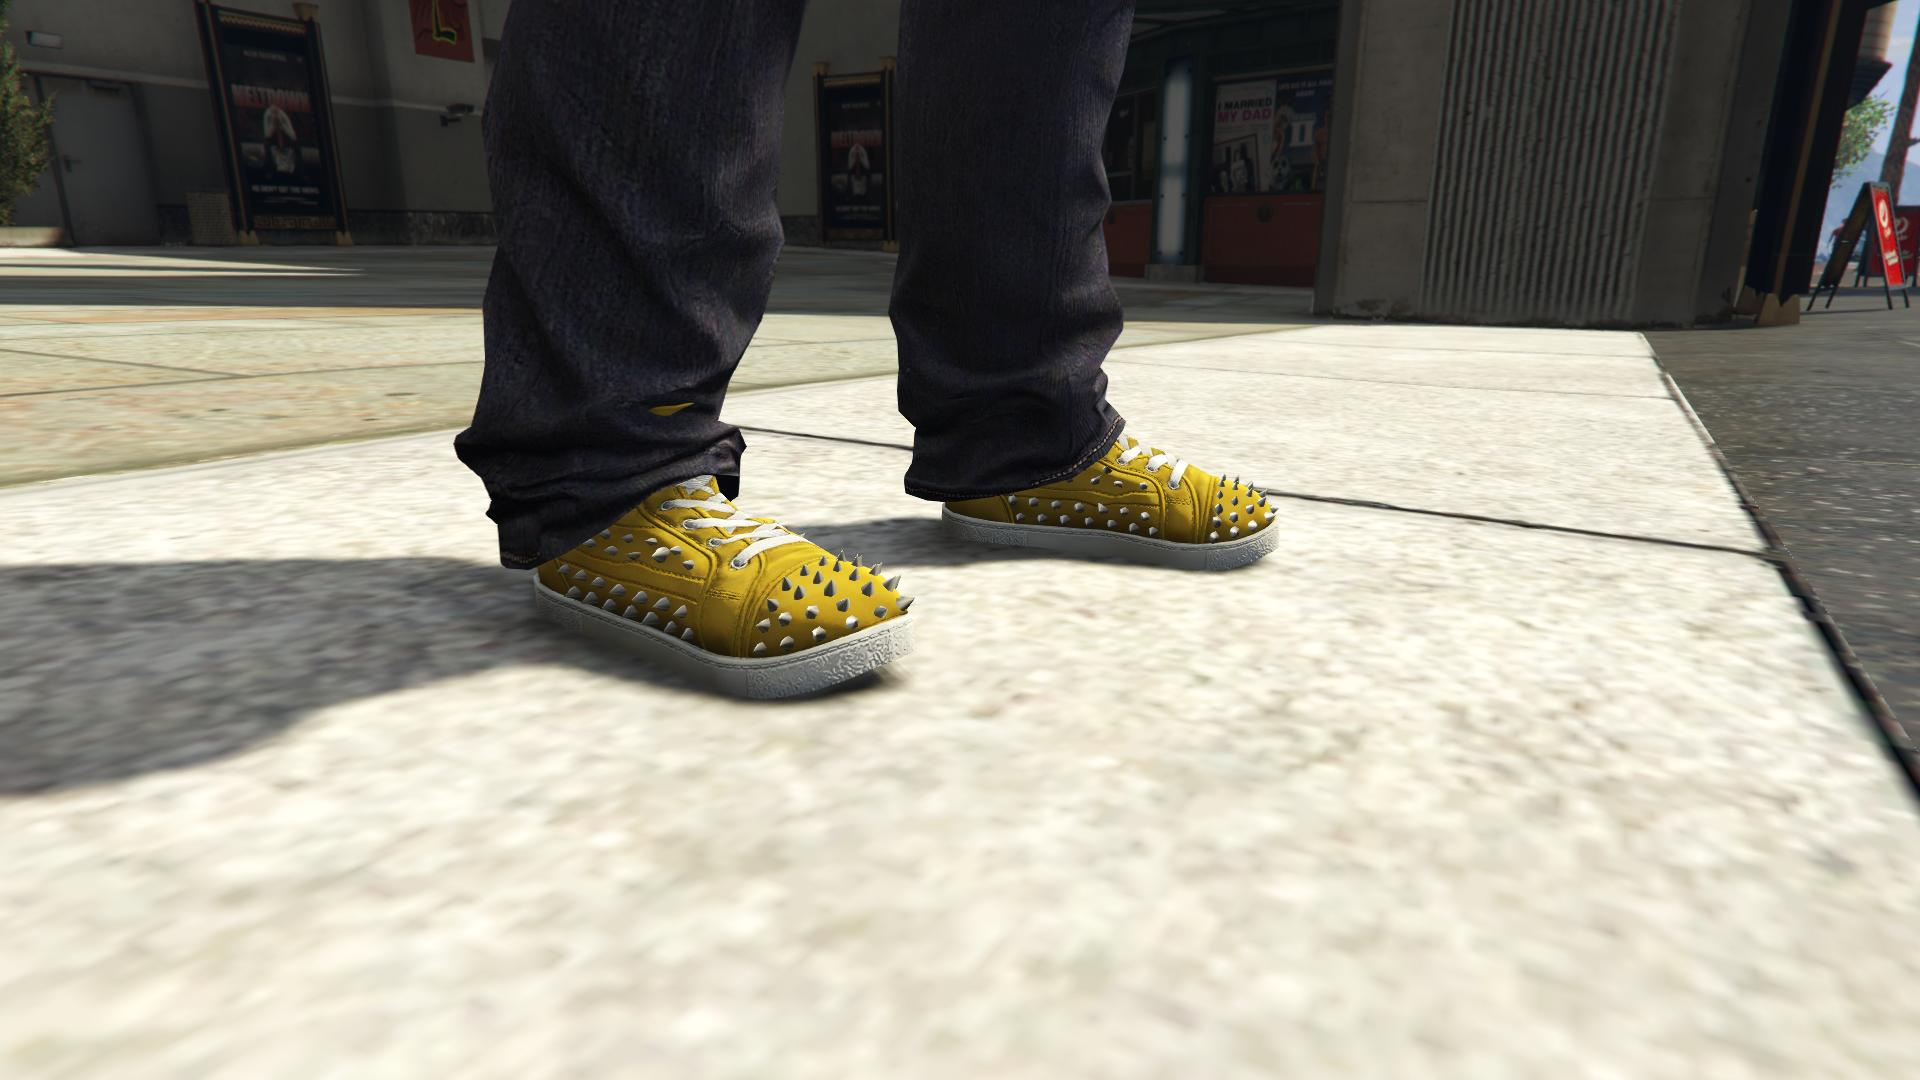 The new GTA:Online update has some fire jawnz [Louboutin and Louis Vuitton  parodies] : r/streetwear